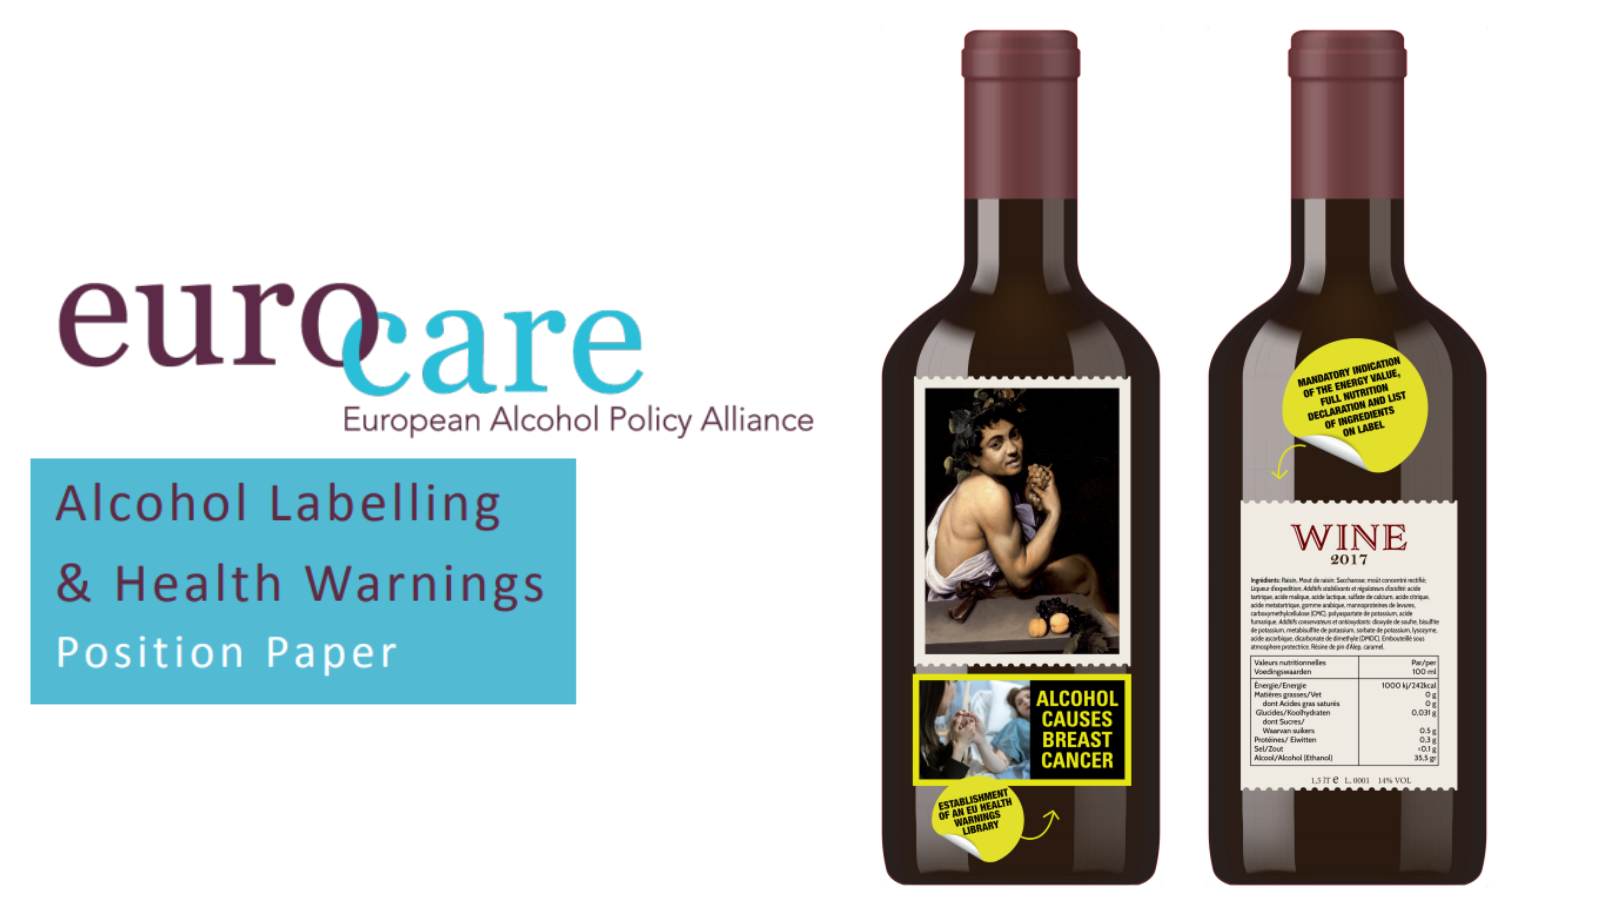 Ingredients, nutritional information and health warnings on alcoholic beverages empower informed consumer decisions and protect citizens’ health